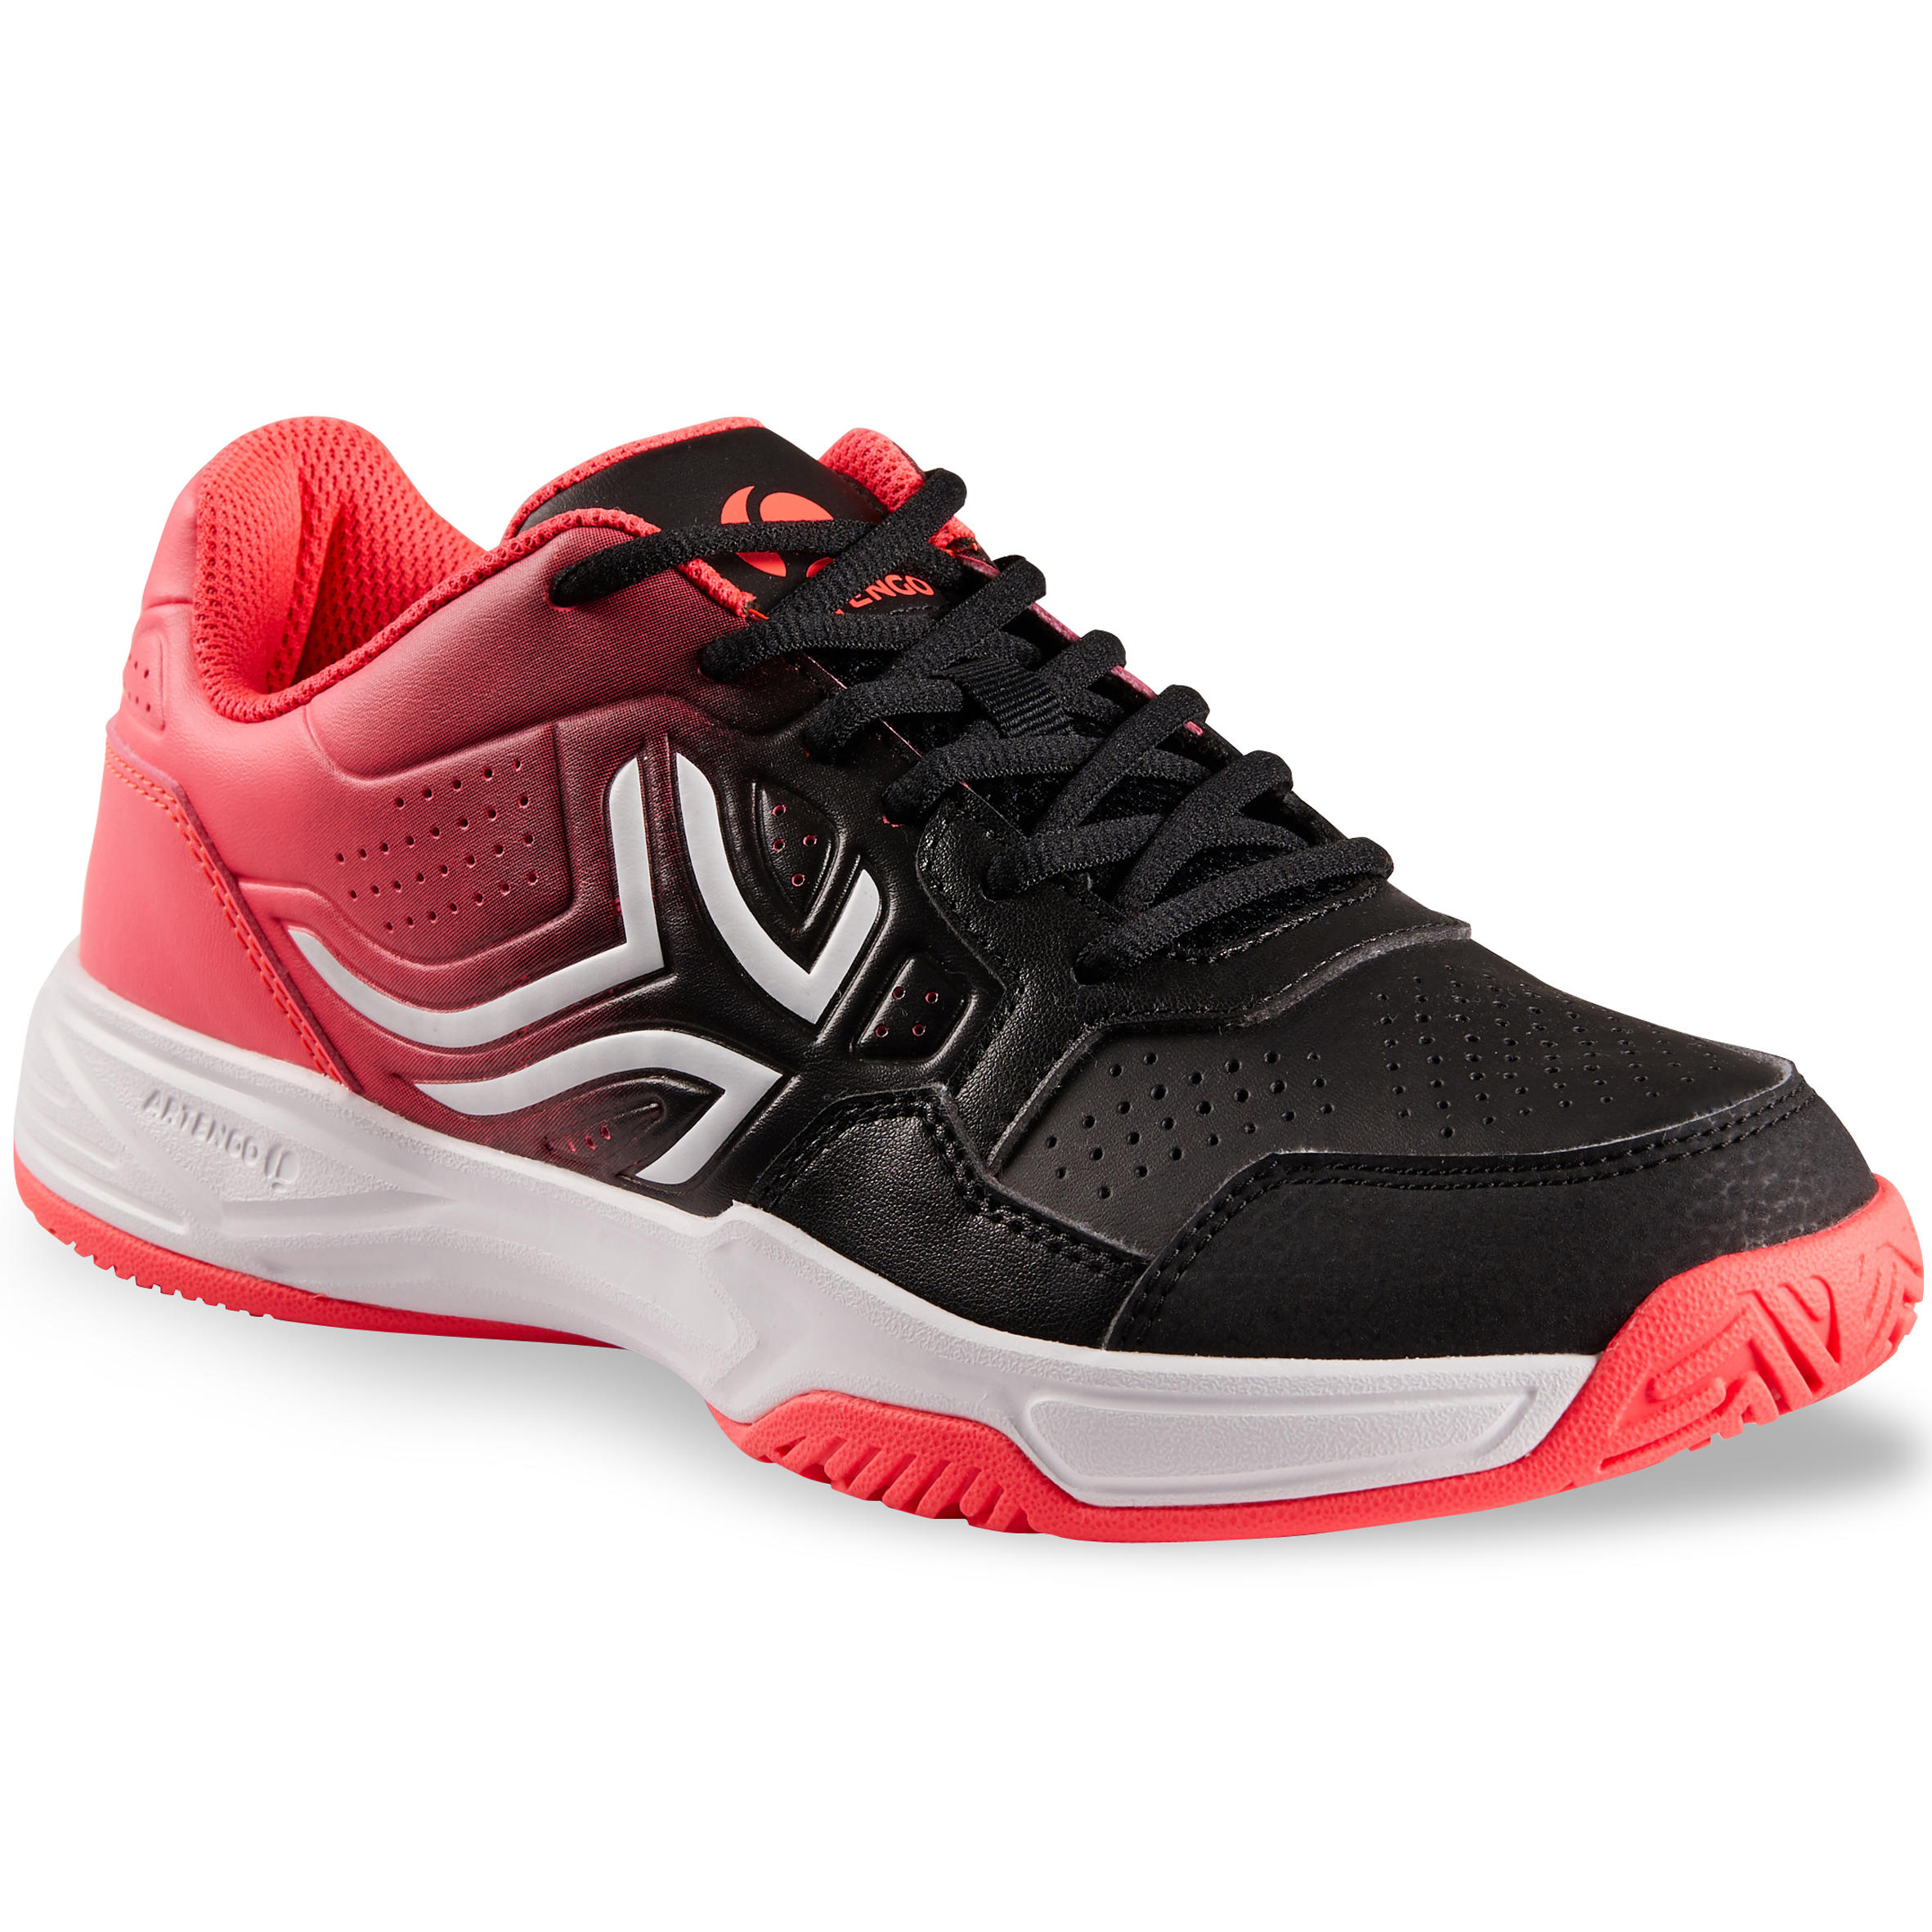 black and pink tennis shoes